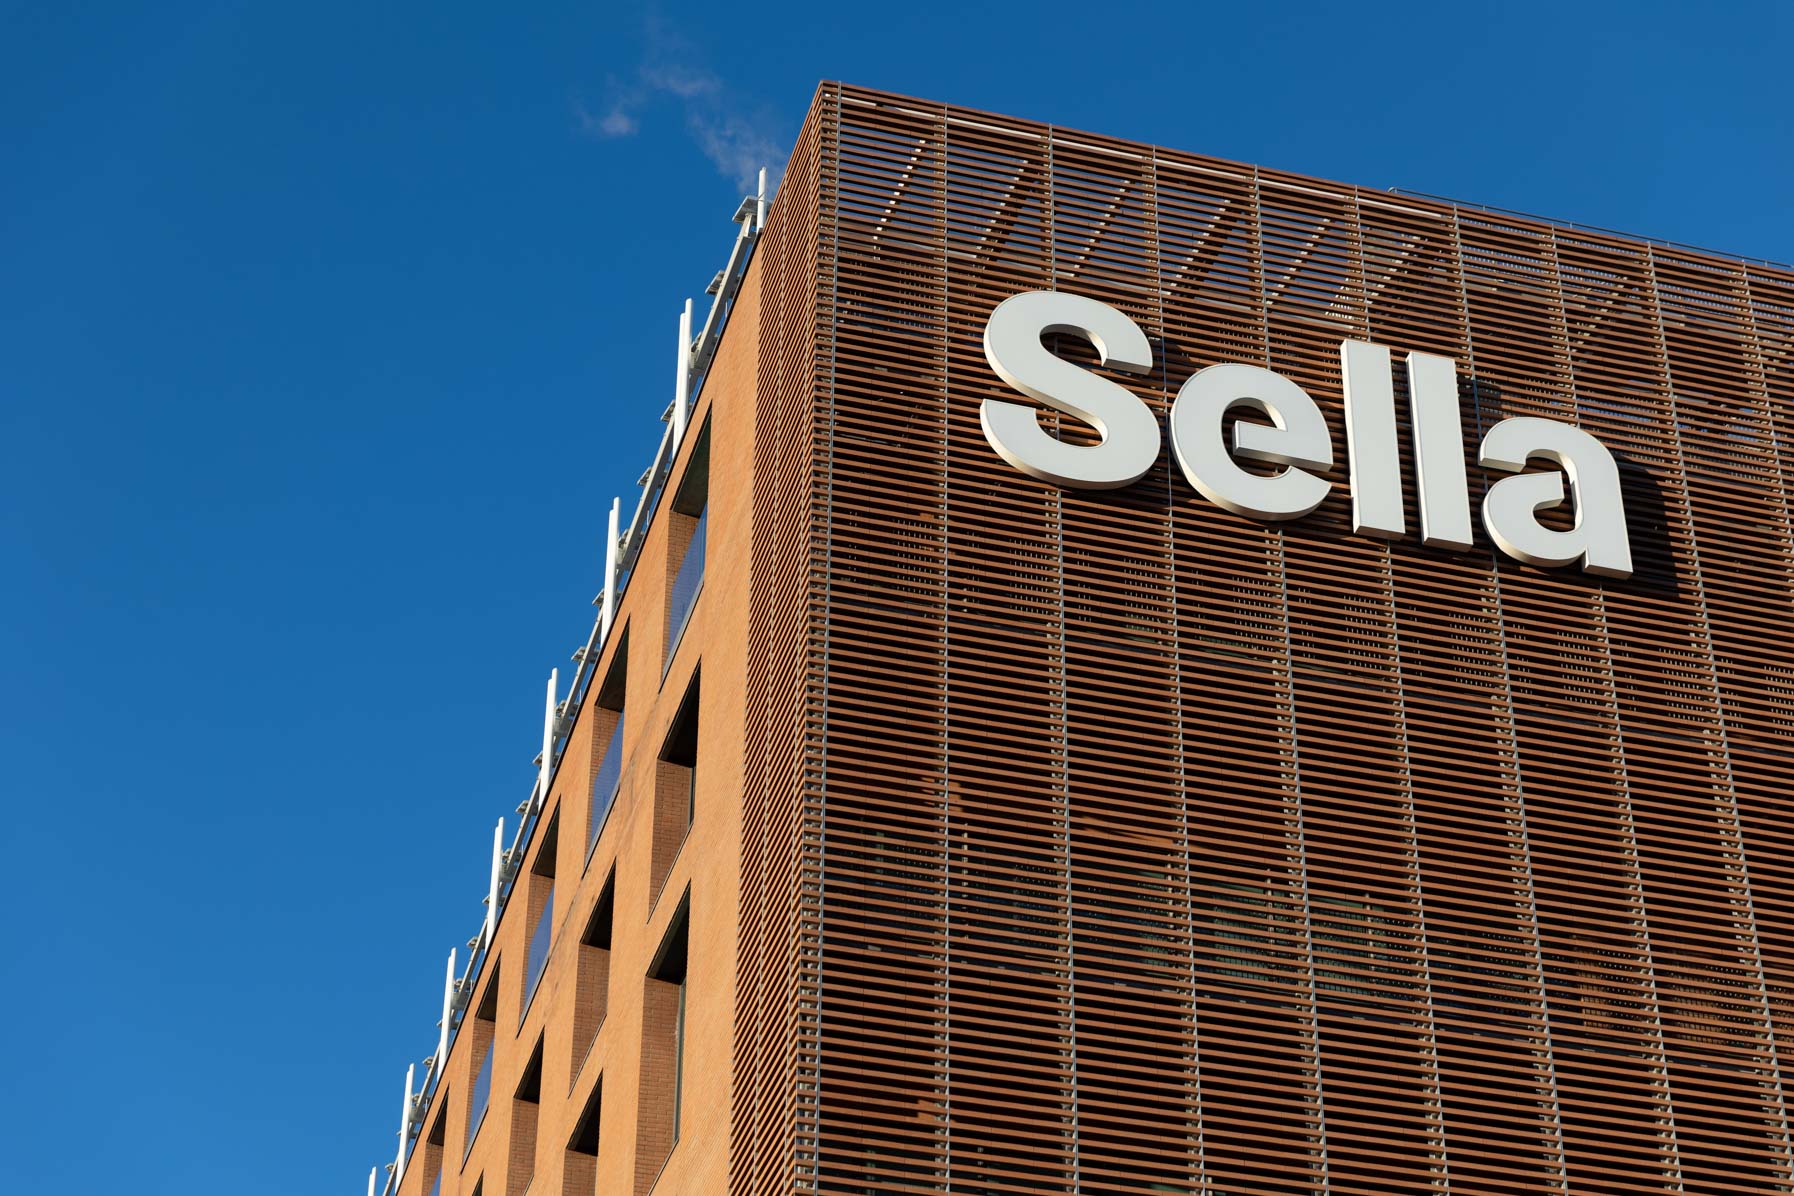 Positive quarter results for the Sella group, the growth strategy continues